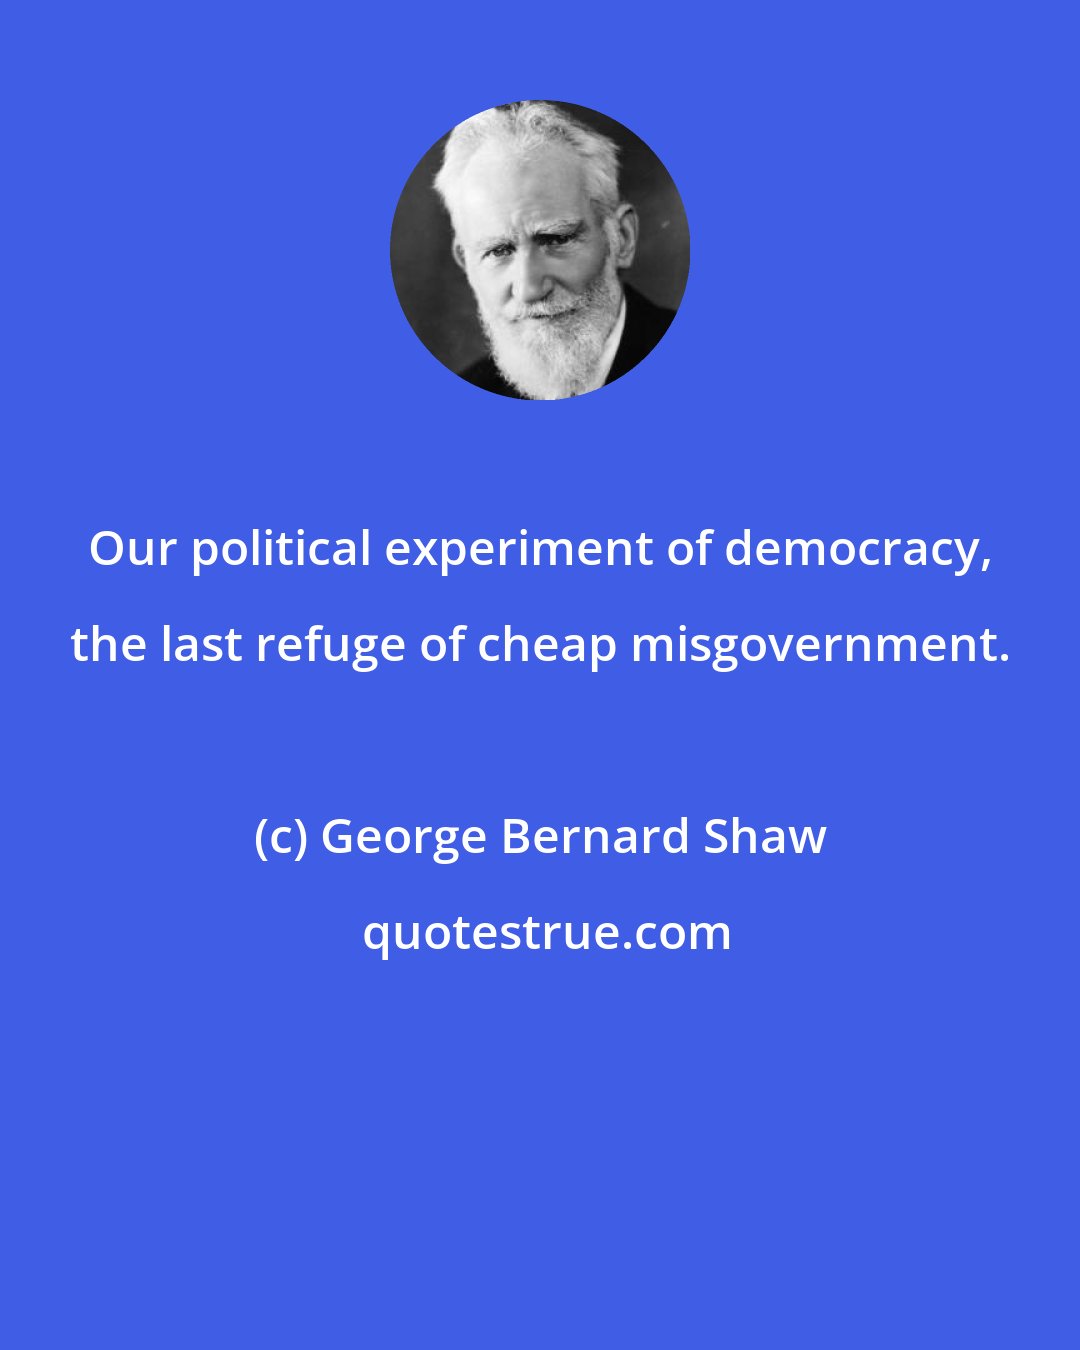 George Bernard Shaw: Our political experiment of democracy, the last refuge of cheap misgovernment.